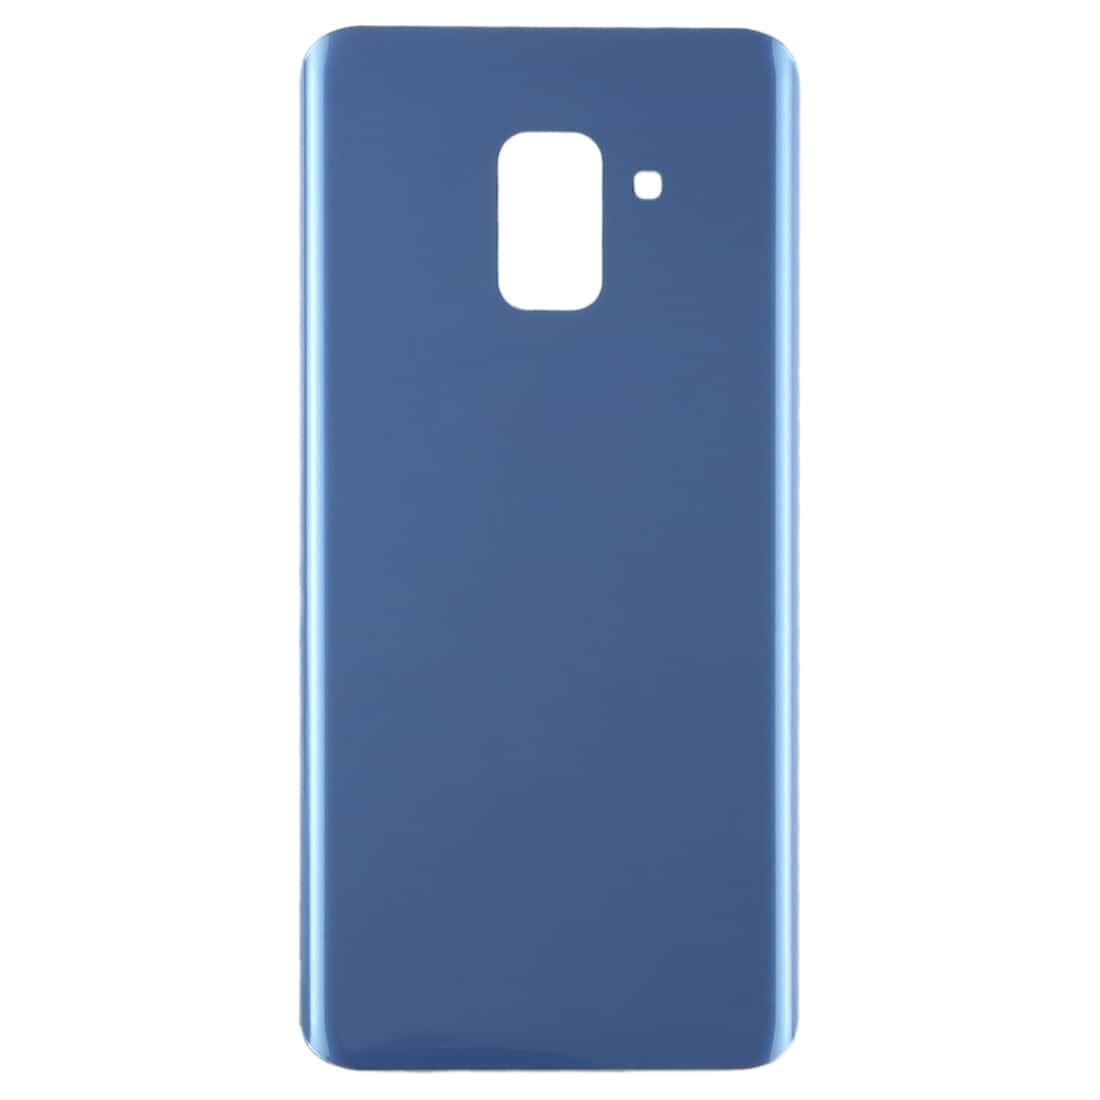 Back Glass Panel for  Samsung Galaxy A8 2018 A530 Blue